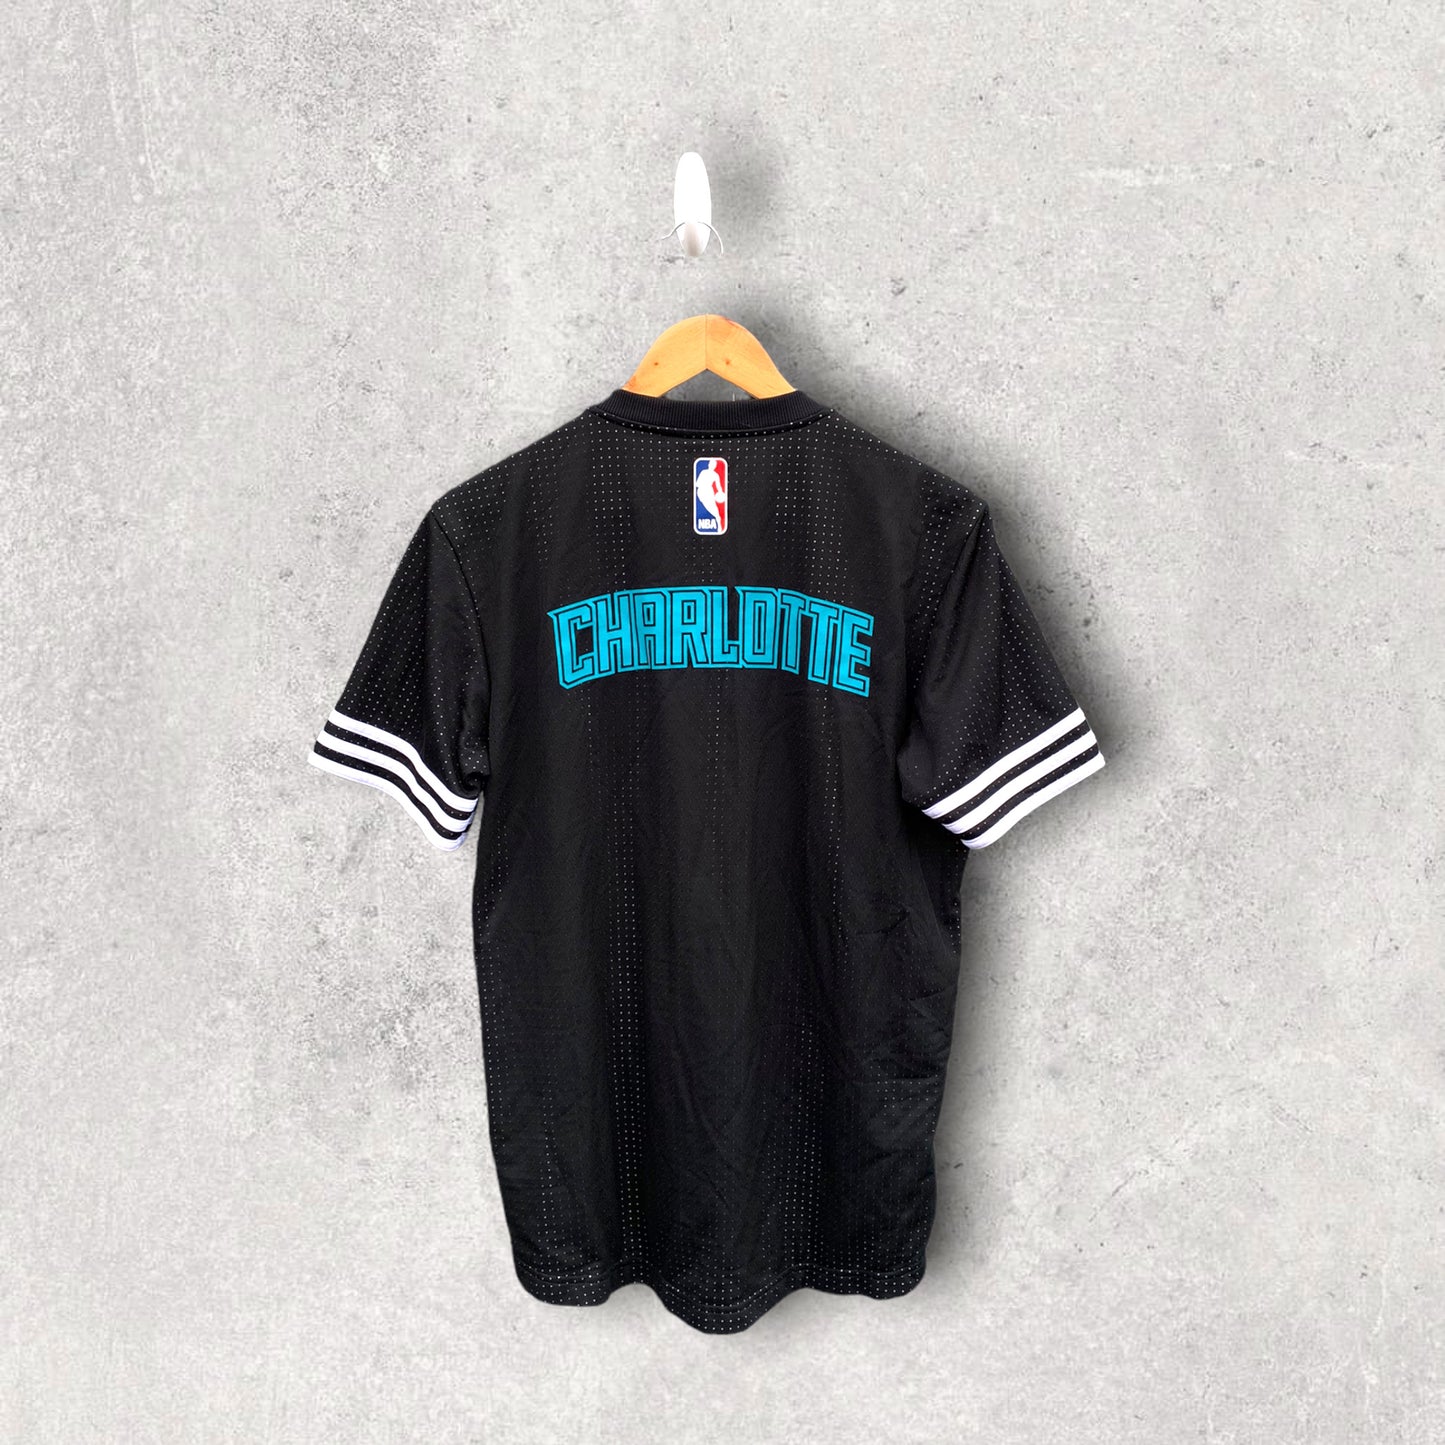 CHARLOTTE HORNETS ADIDAS WARM UP TOP